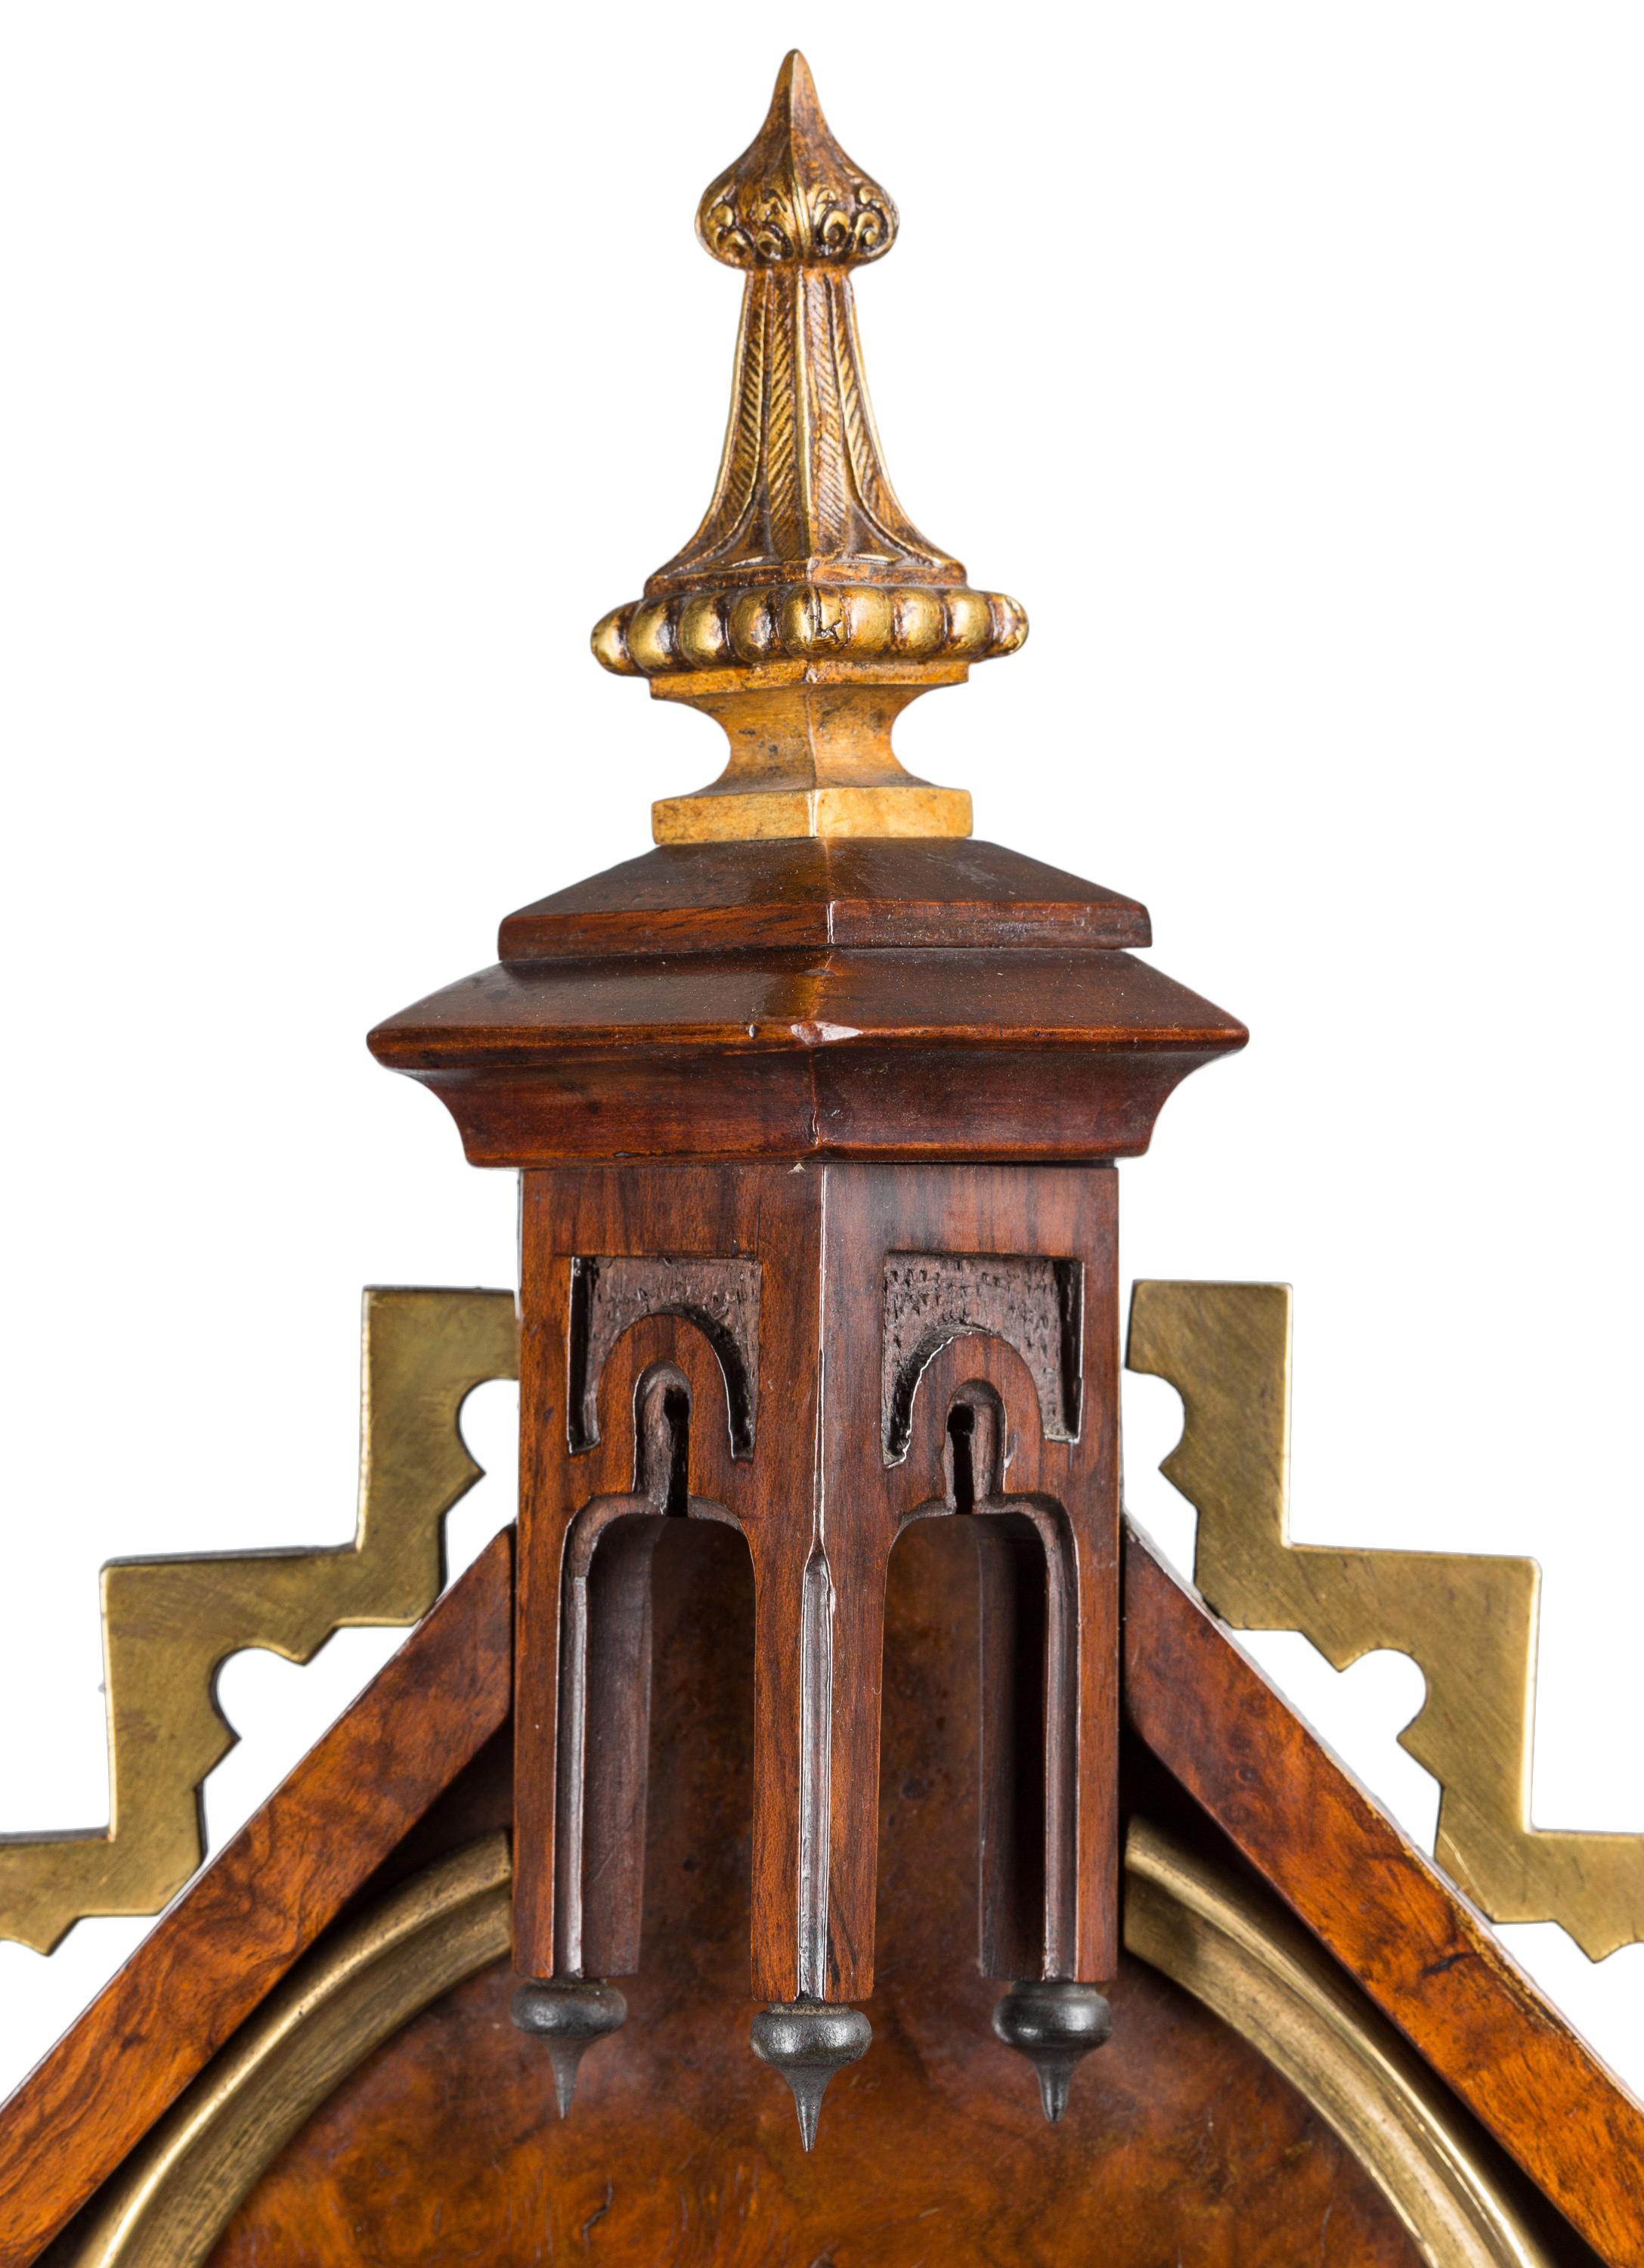 Gothic Revival 19th Century English Burl Wood Cathedral Style Victorian Gothic Mantel Clock